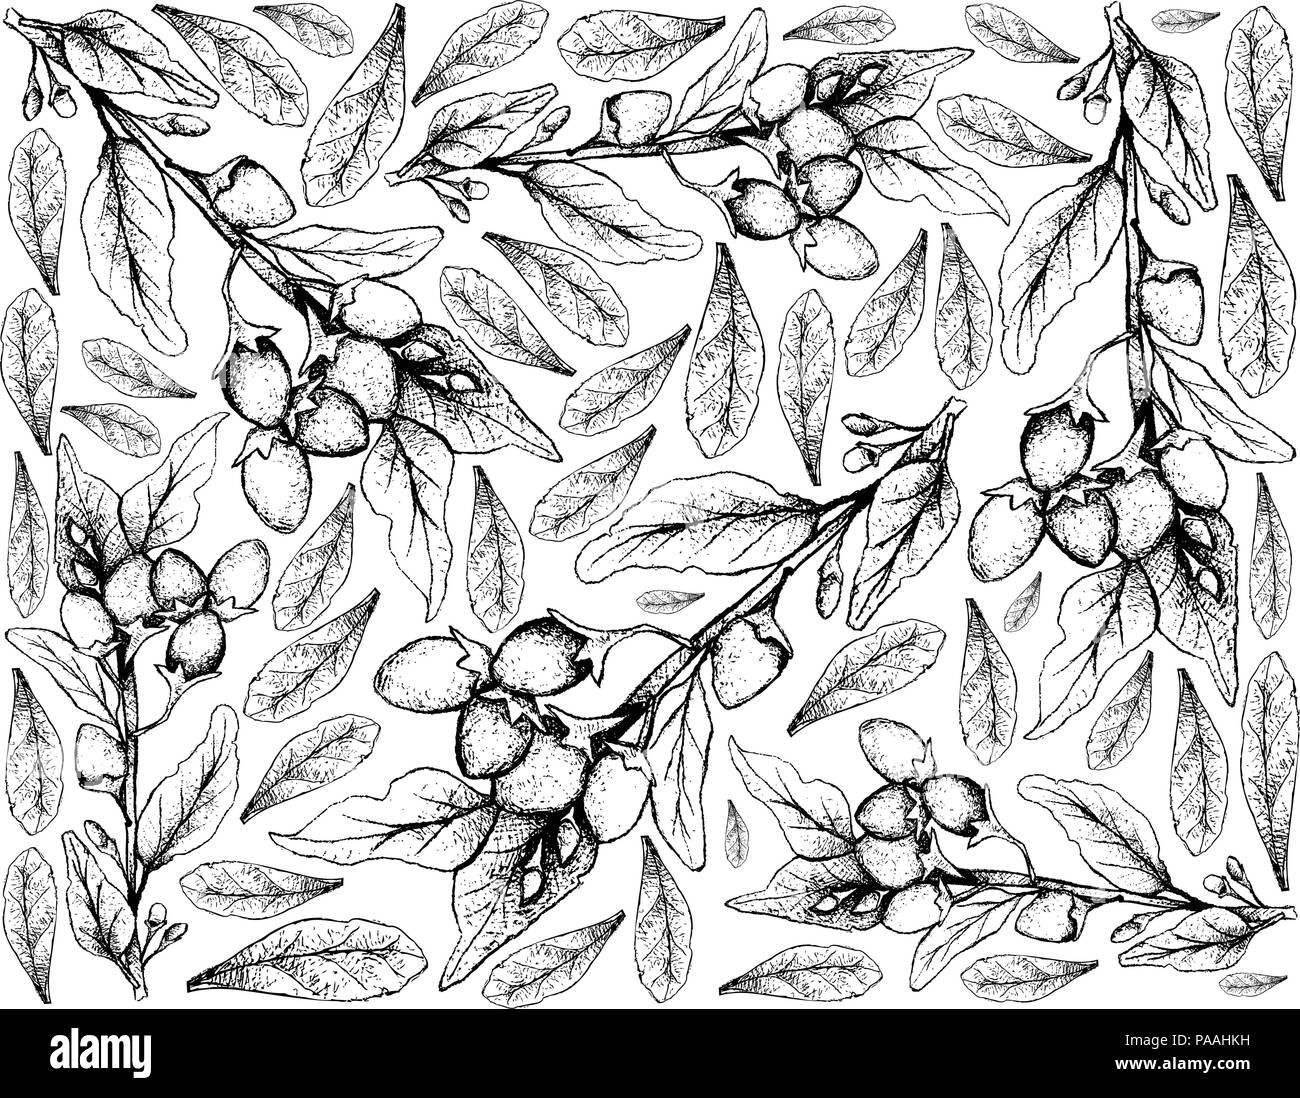 Berry Fruit, Illustration Wallpaper Background of Hand Drawn Sketch of Goji Berry or Lycium Barbarum Fruits. A Good Source of Vitamin C, A, Zinc, Iron Stock Vector